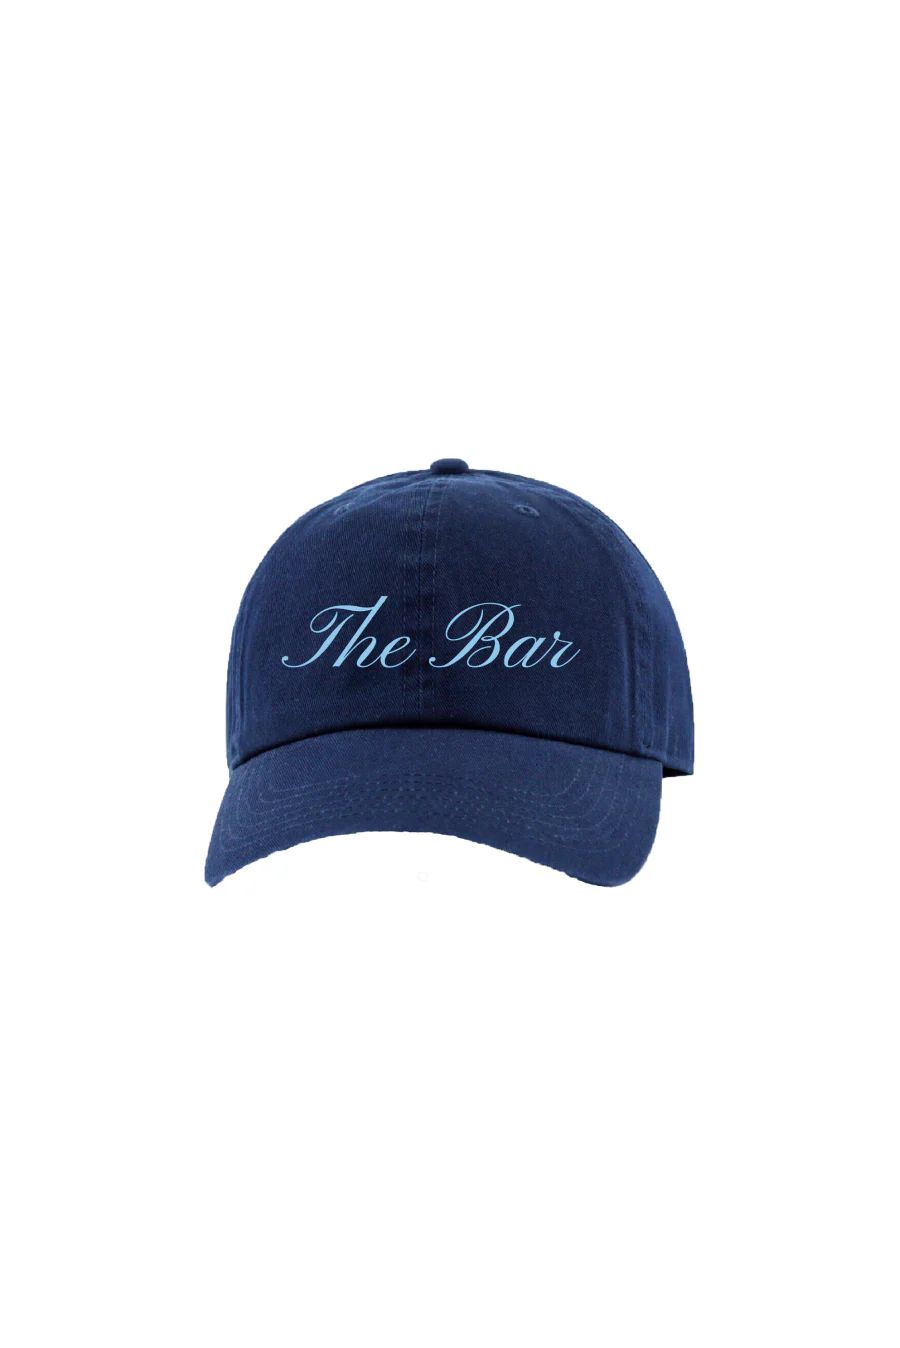 THE BAR HAT NAVY/BABY BLUE | The Bar